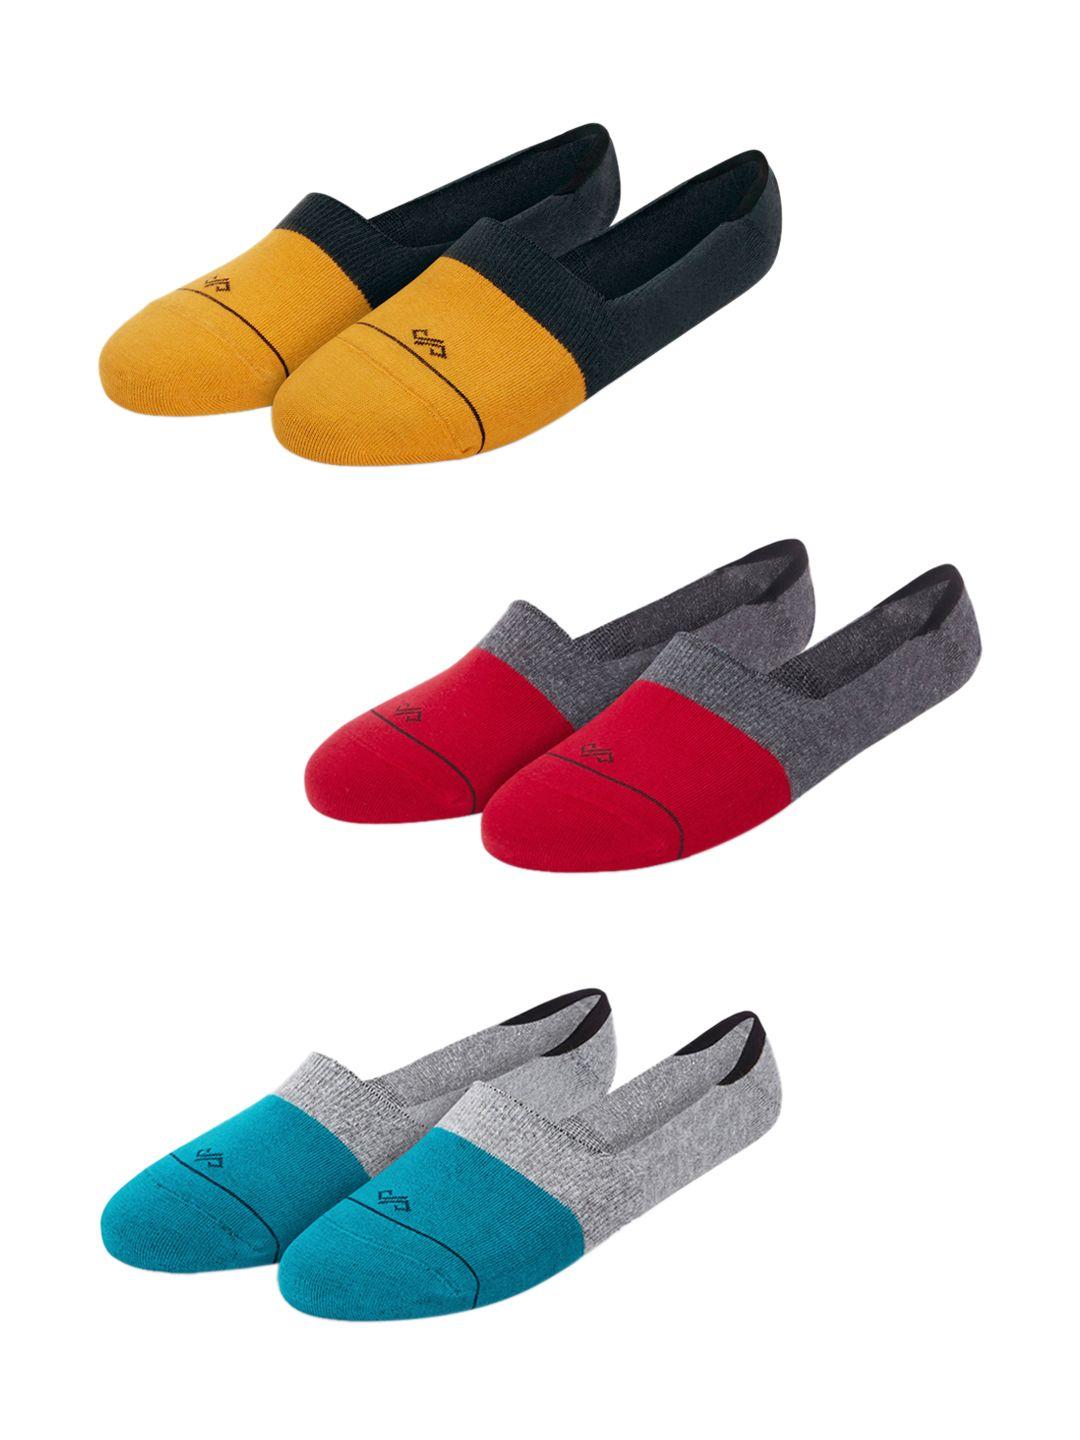 dynamocks multicoloured pack of 3 shoe liners